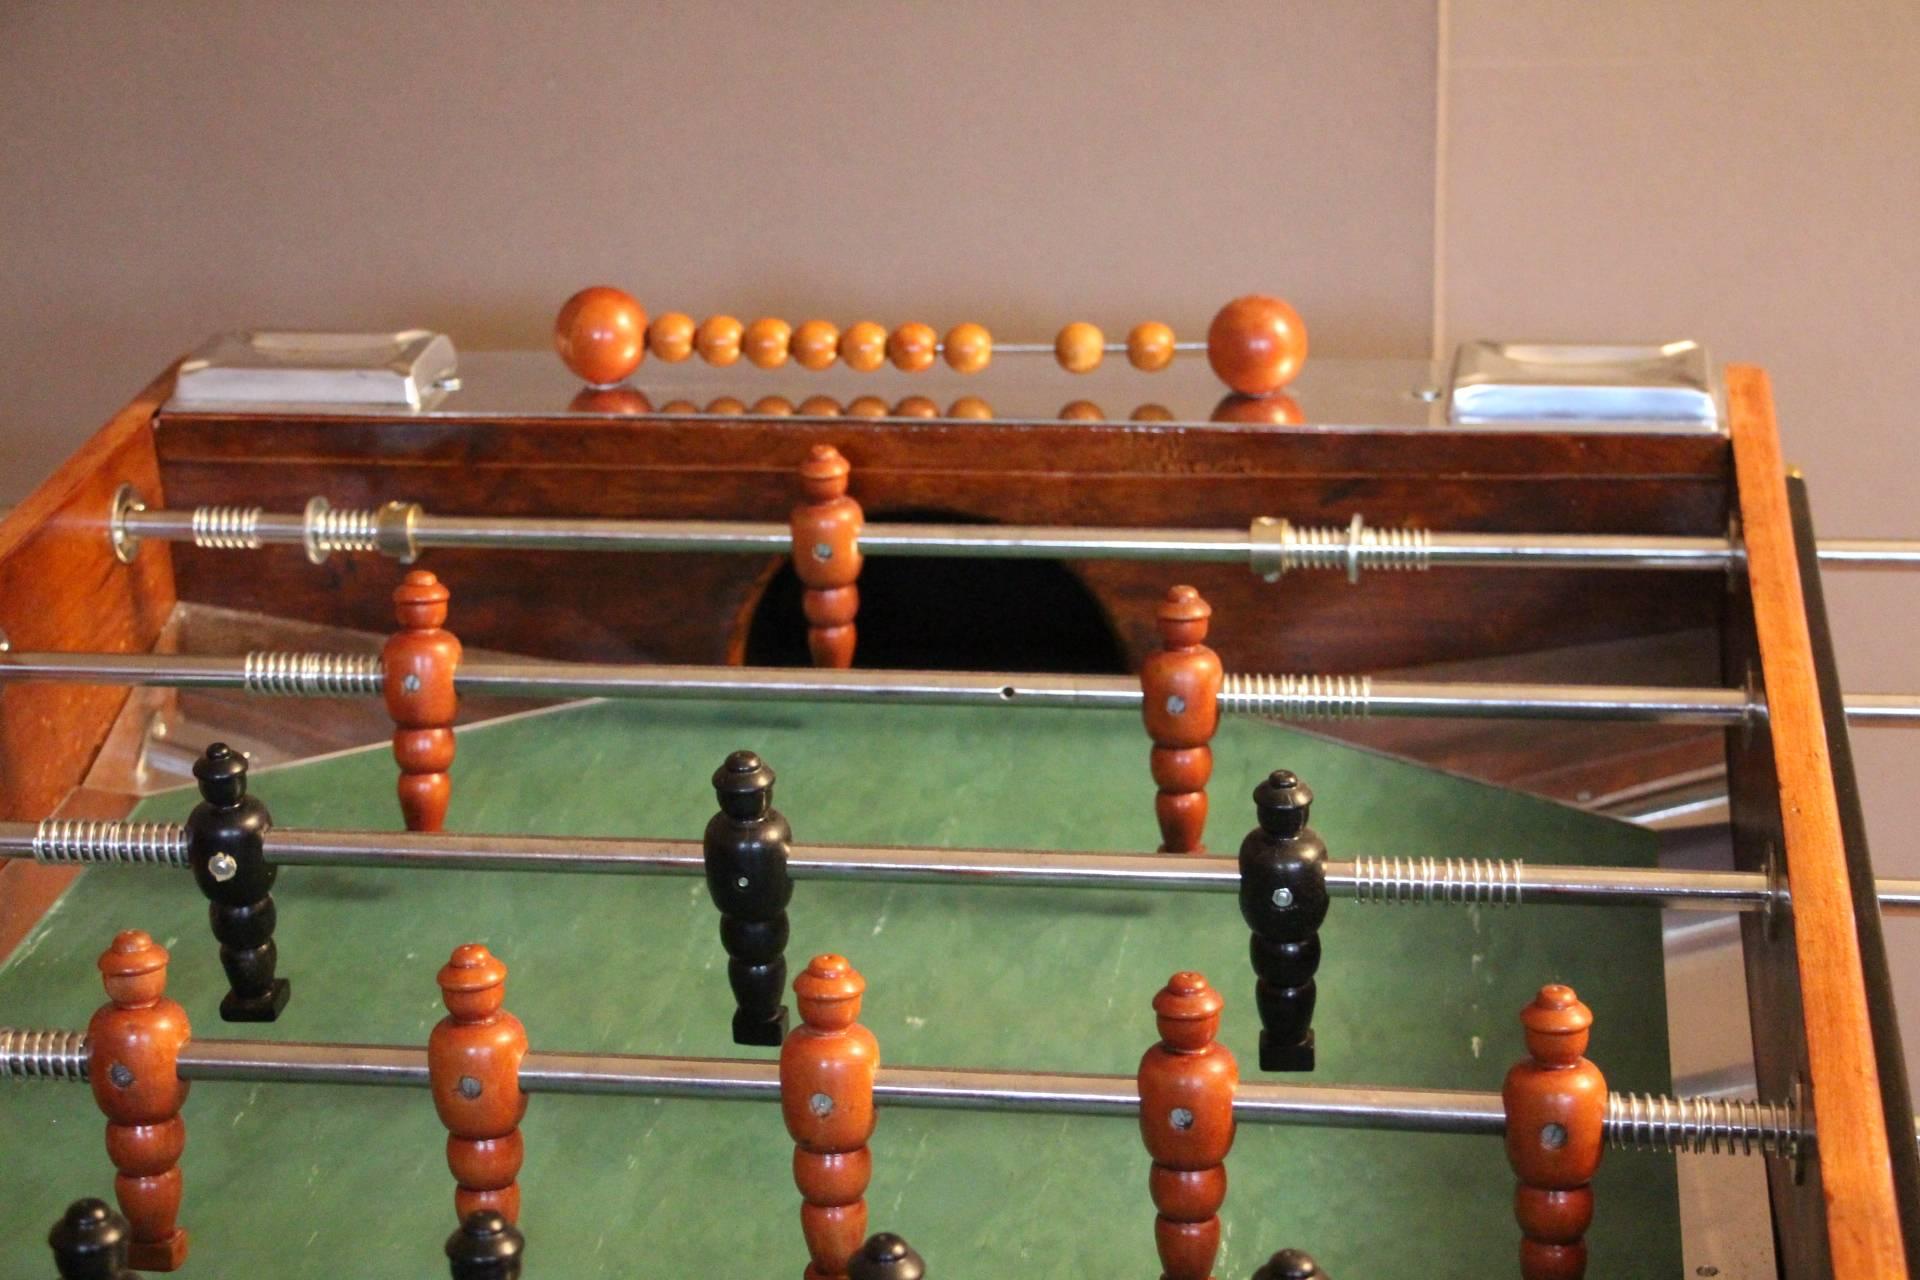 Mid-Century French foosball table
Unusual shape of French foosball table, this item is spectacular. It is in light color wood and blackened wood and features many aluminium pieces. Its players are in carved wood. Original green field and four